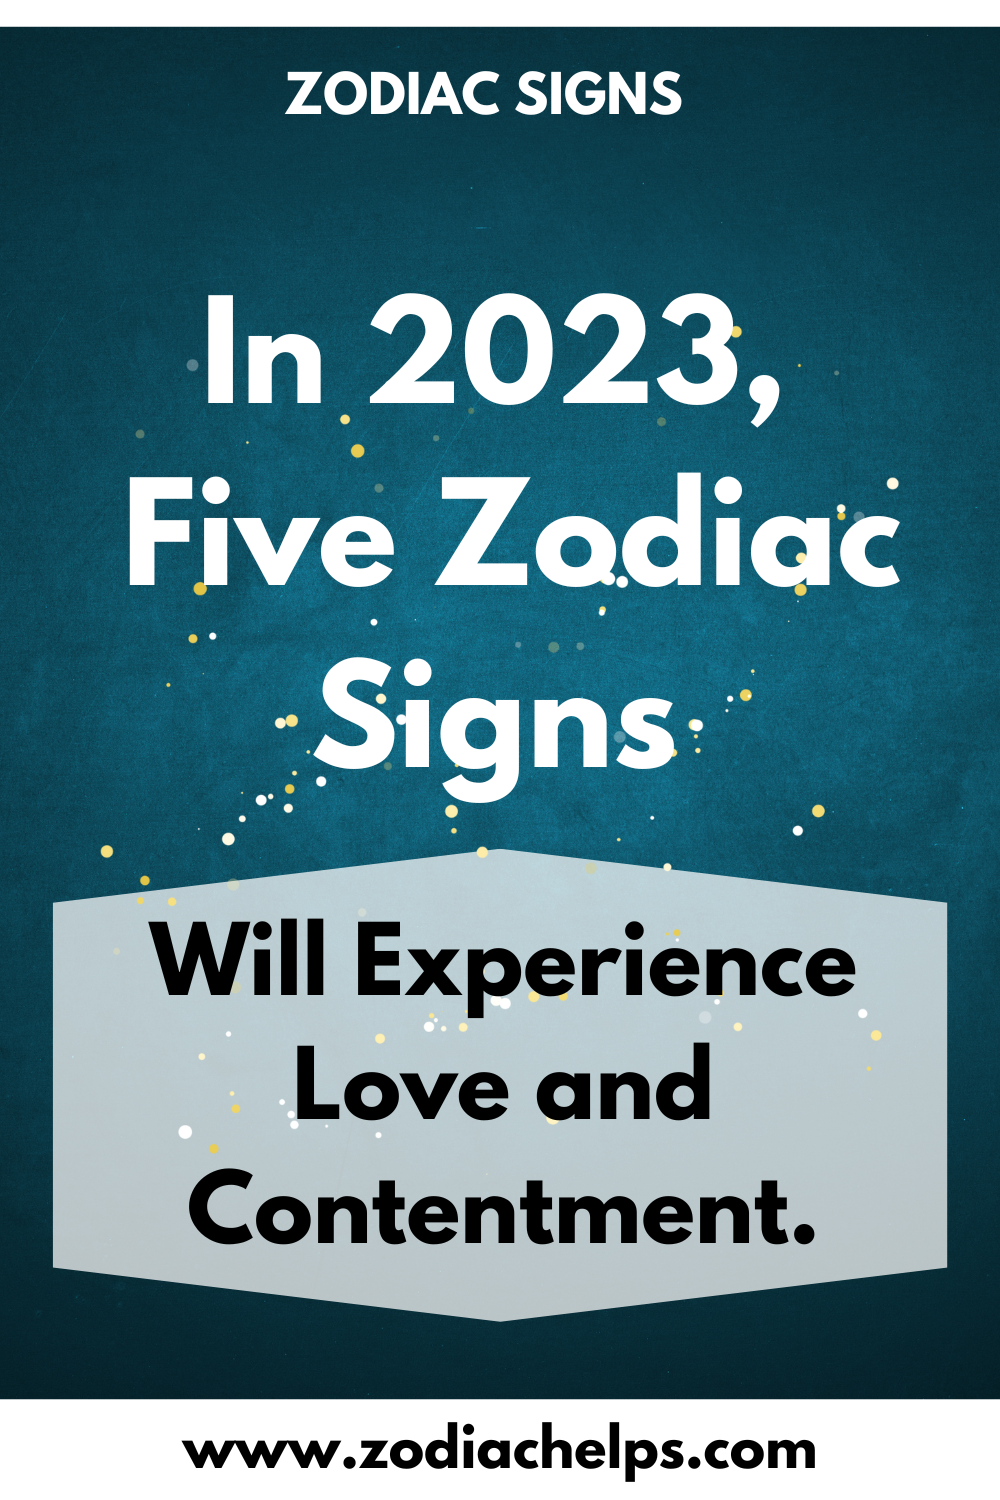 In 2023, Five Zodiac Signs Will Experience Love and Contentment.